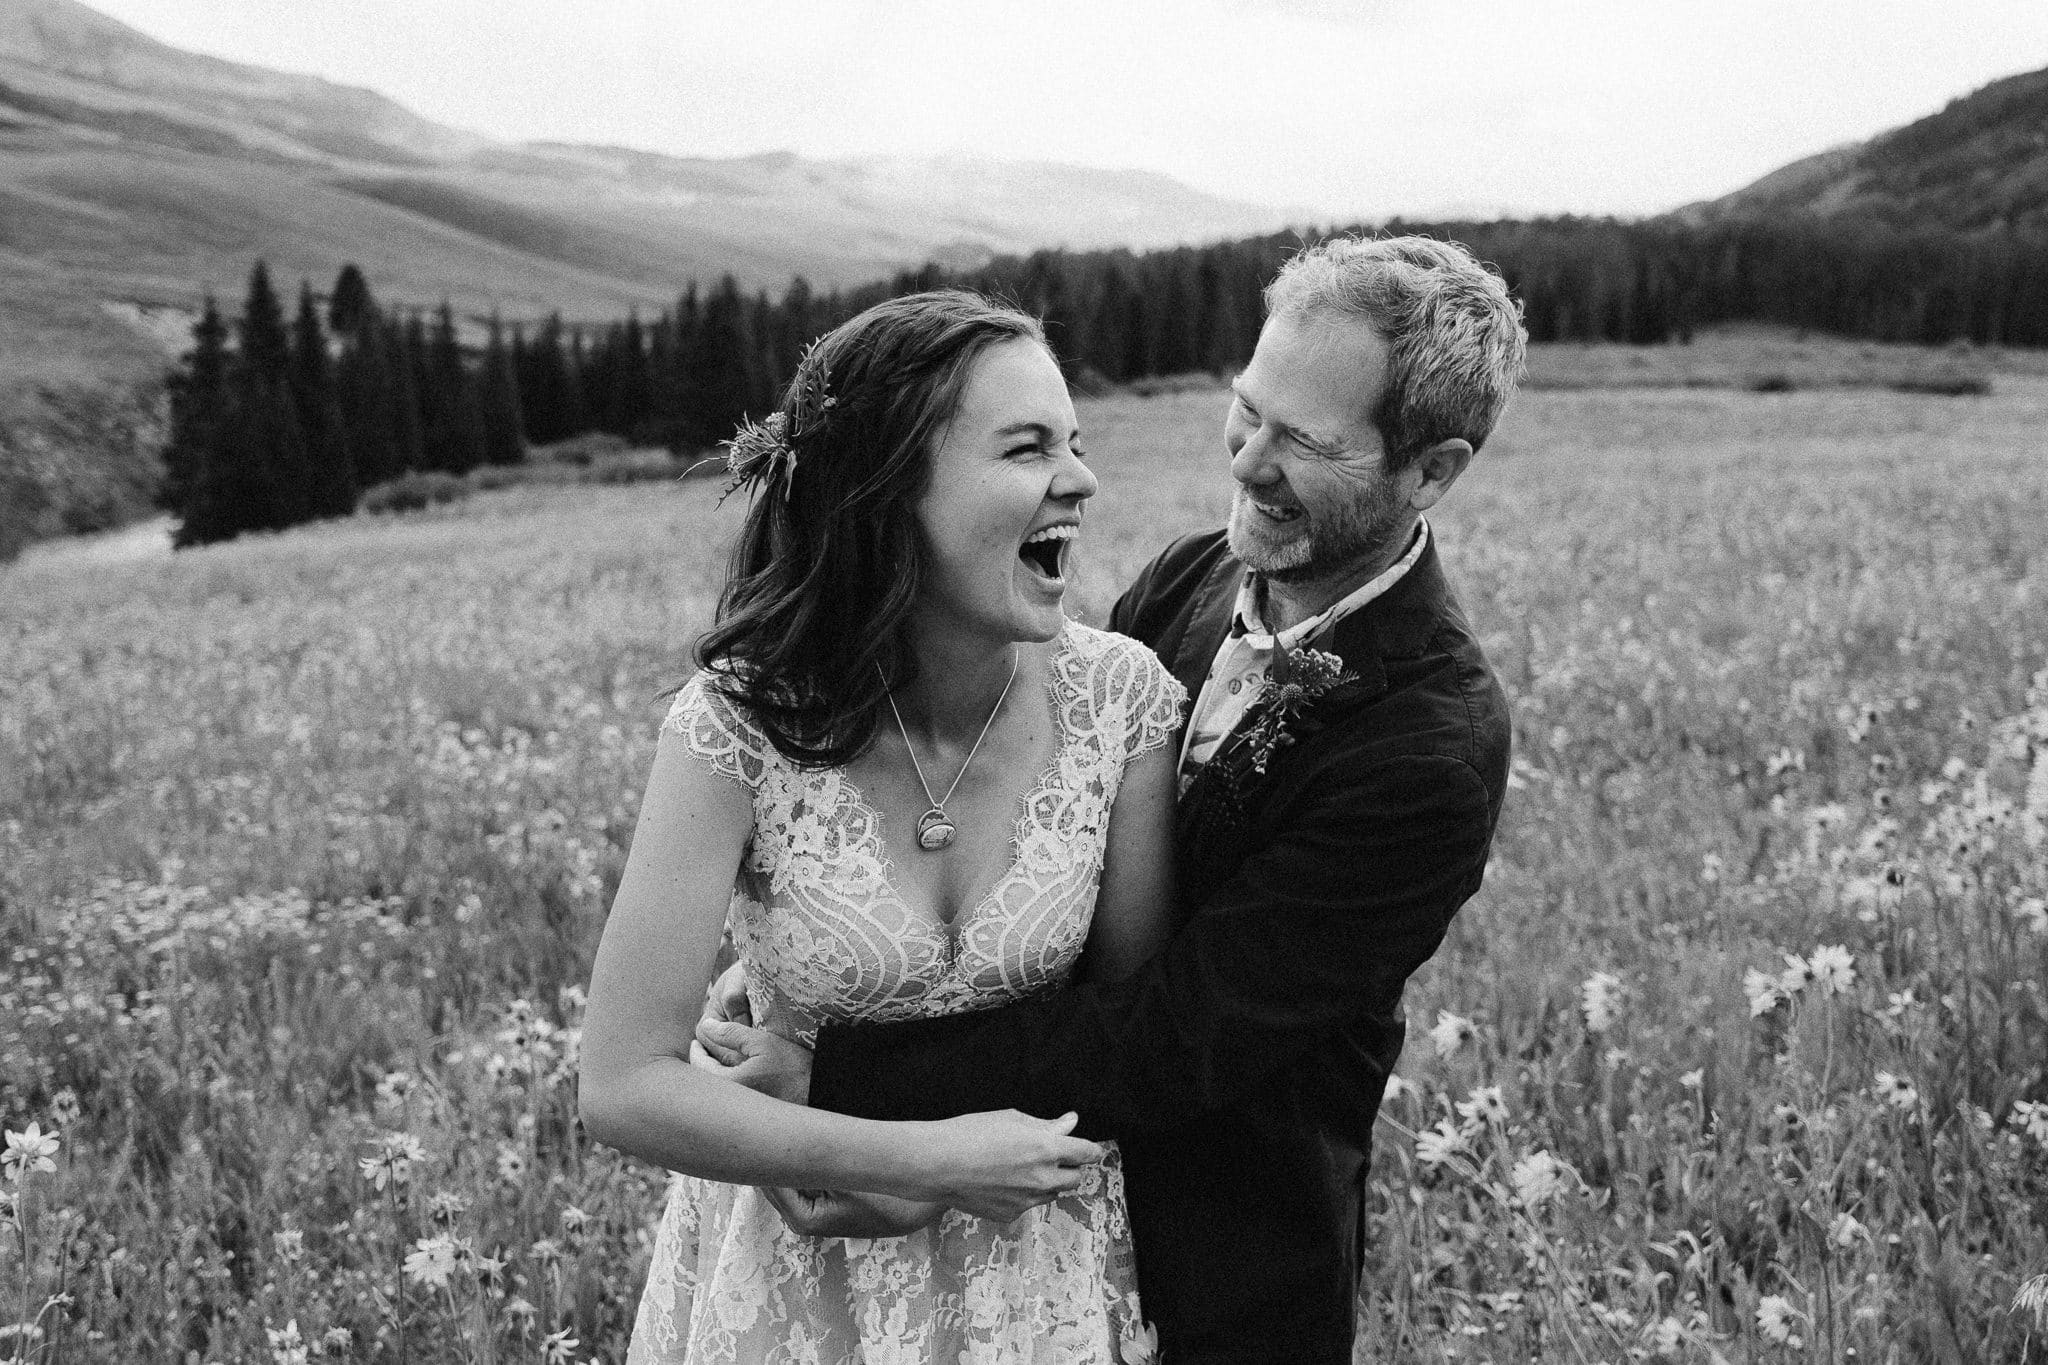 Crested Butte wedding in mountains with wildflowers, Colorado wedding photographer